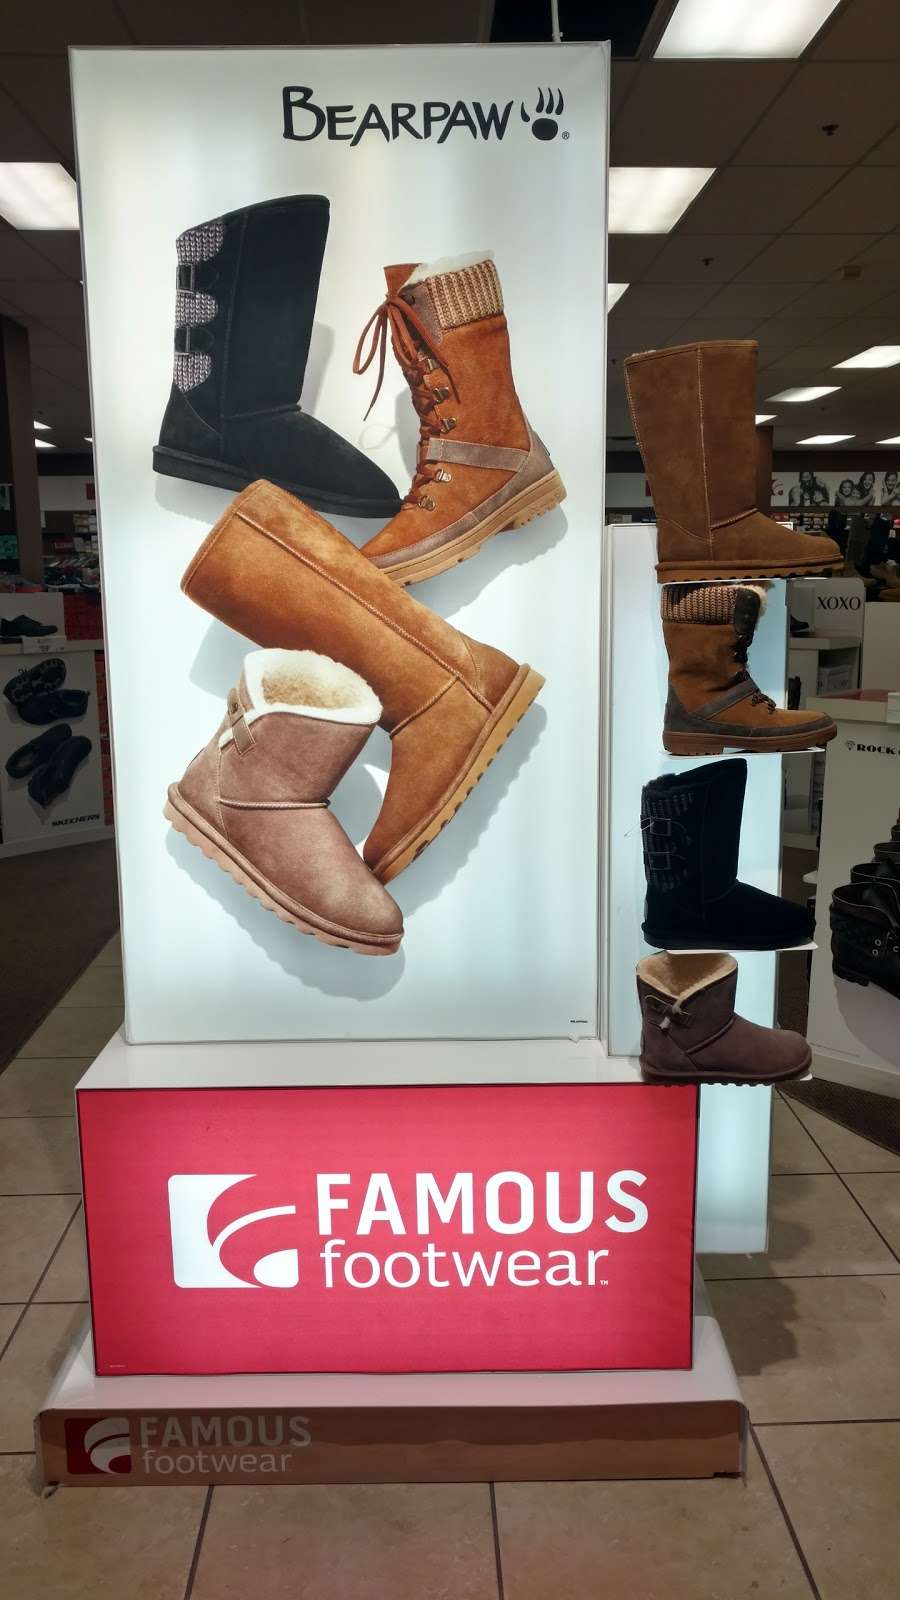 Famous Footwear | Valencia Marketplace, 25680 The Old Rd, Stevenson Ranch, CA 91381, USA | Phone: (661) 600-0020